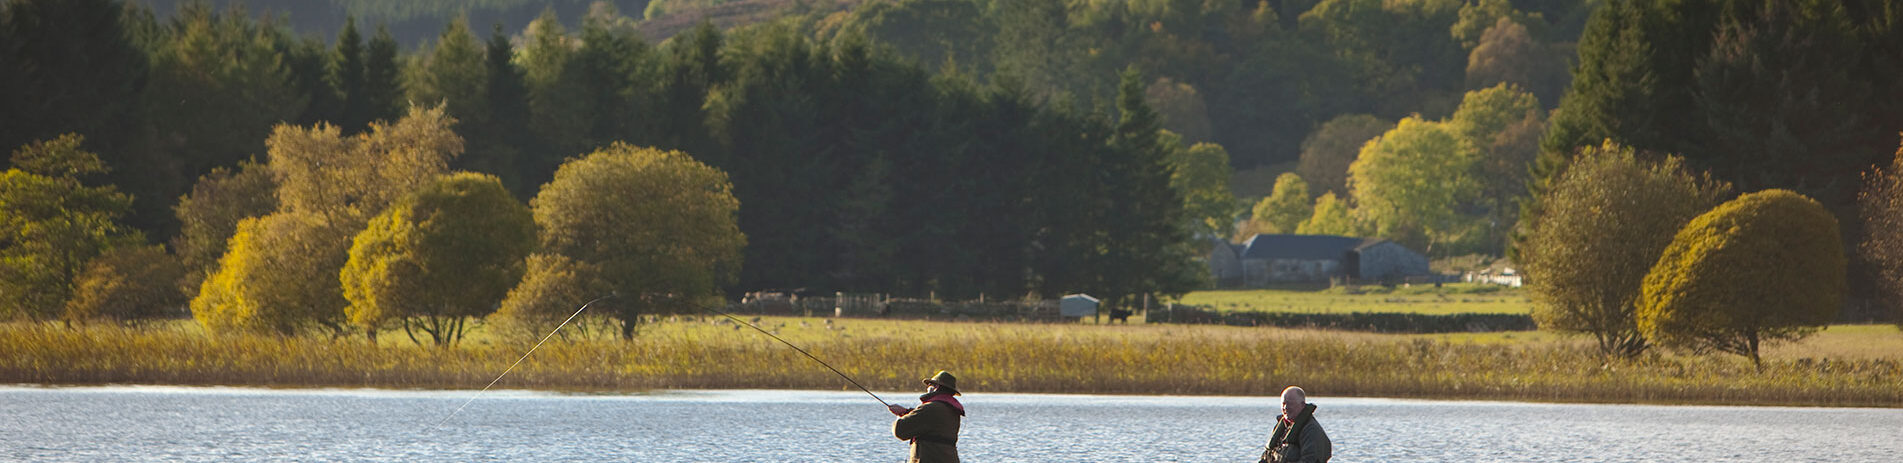 two-men-fishing-from-boat-on-loch-with-hills-and-forests-in-the-background